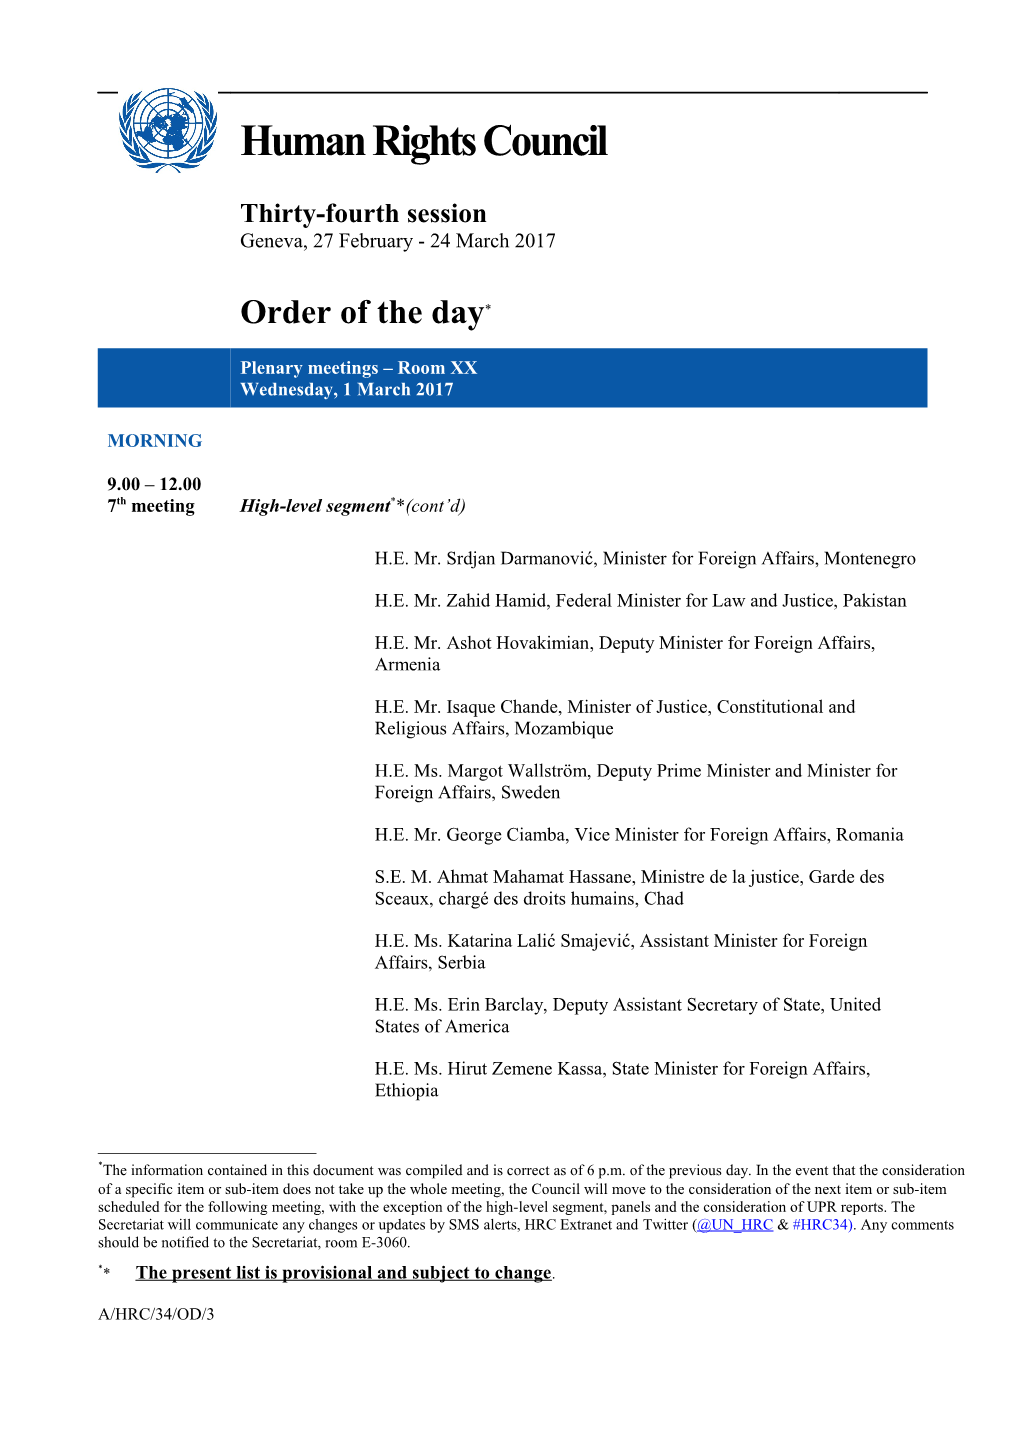 Order of the Day, Wednesday 1 March 2017